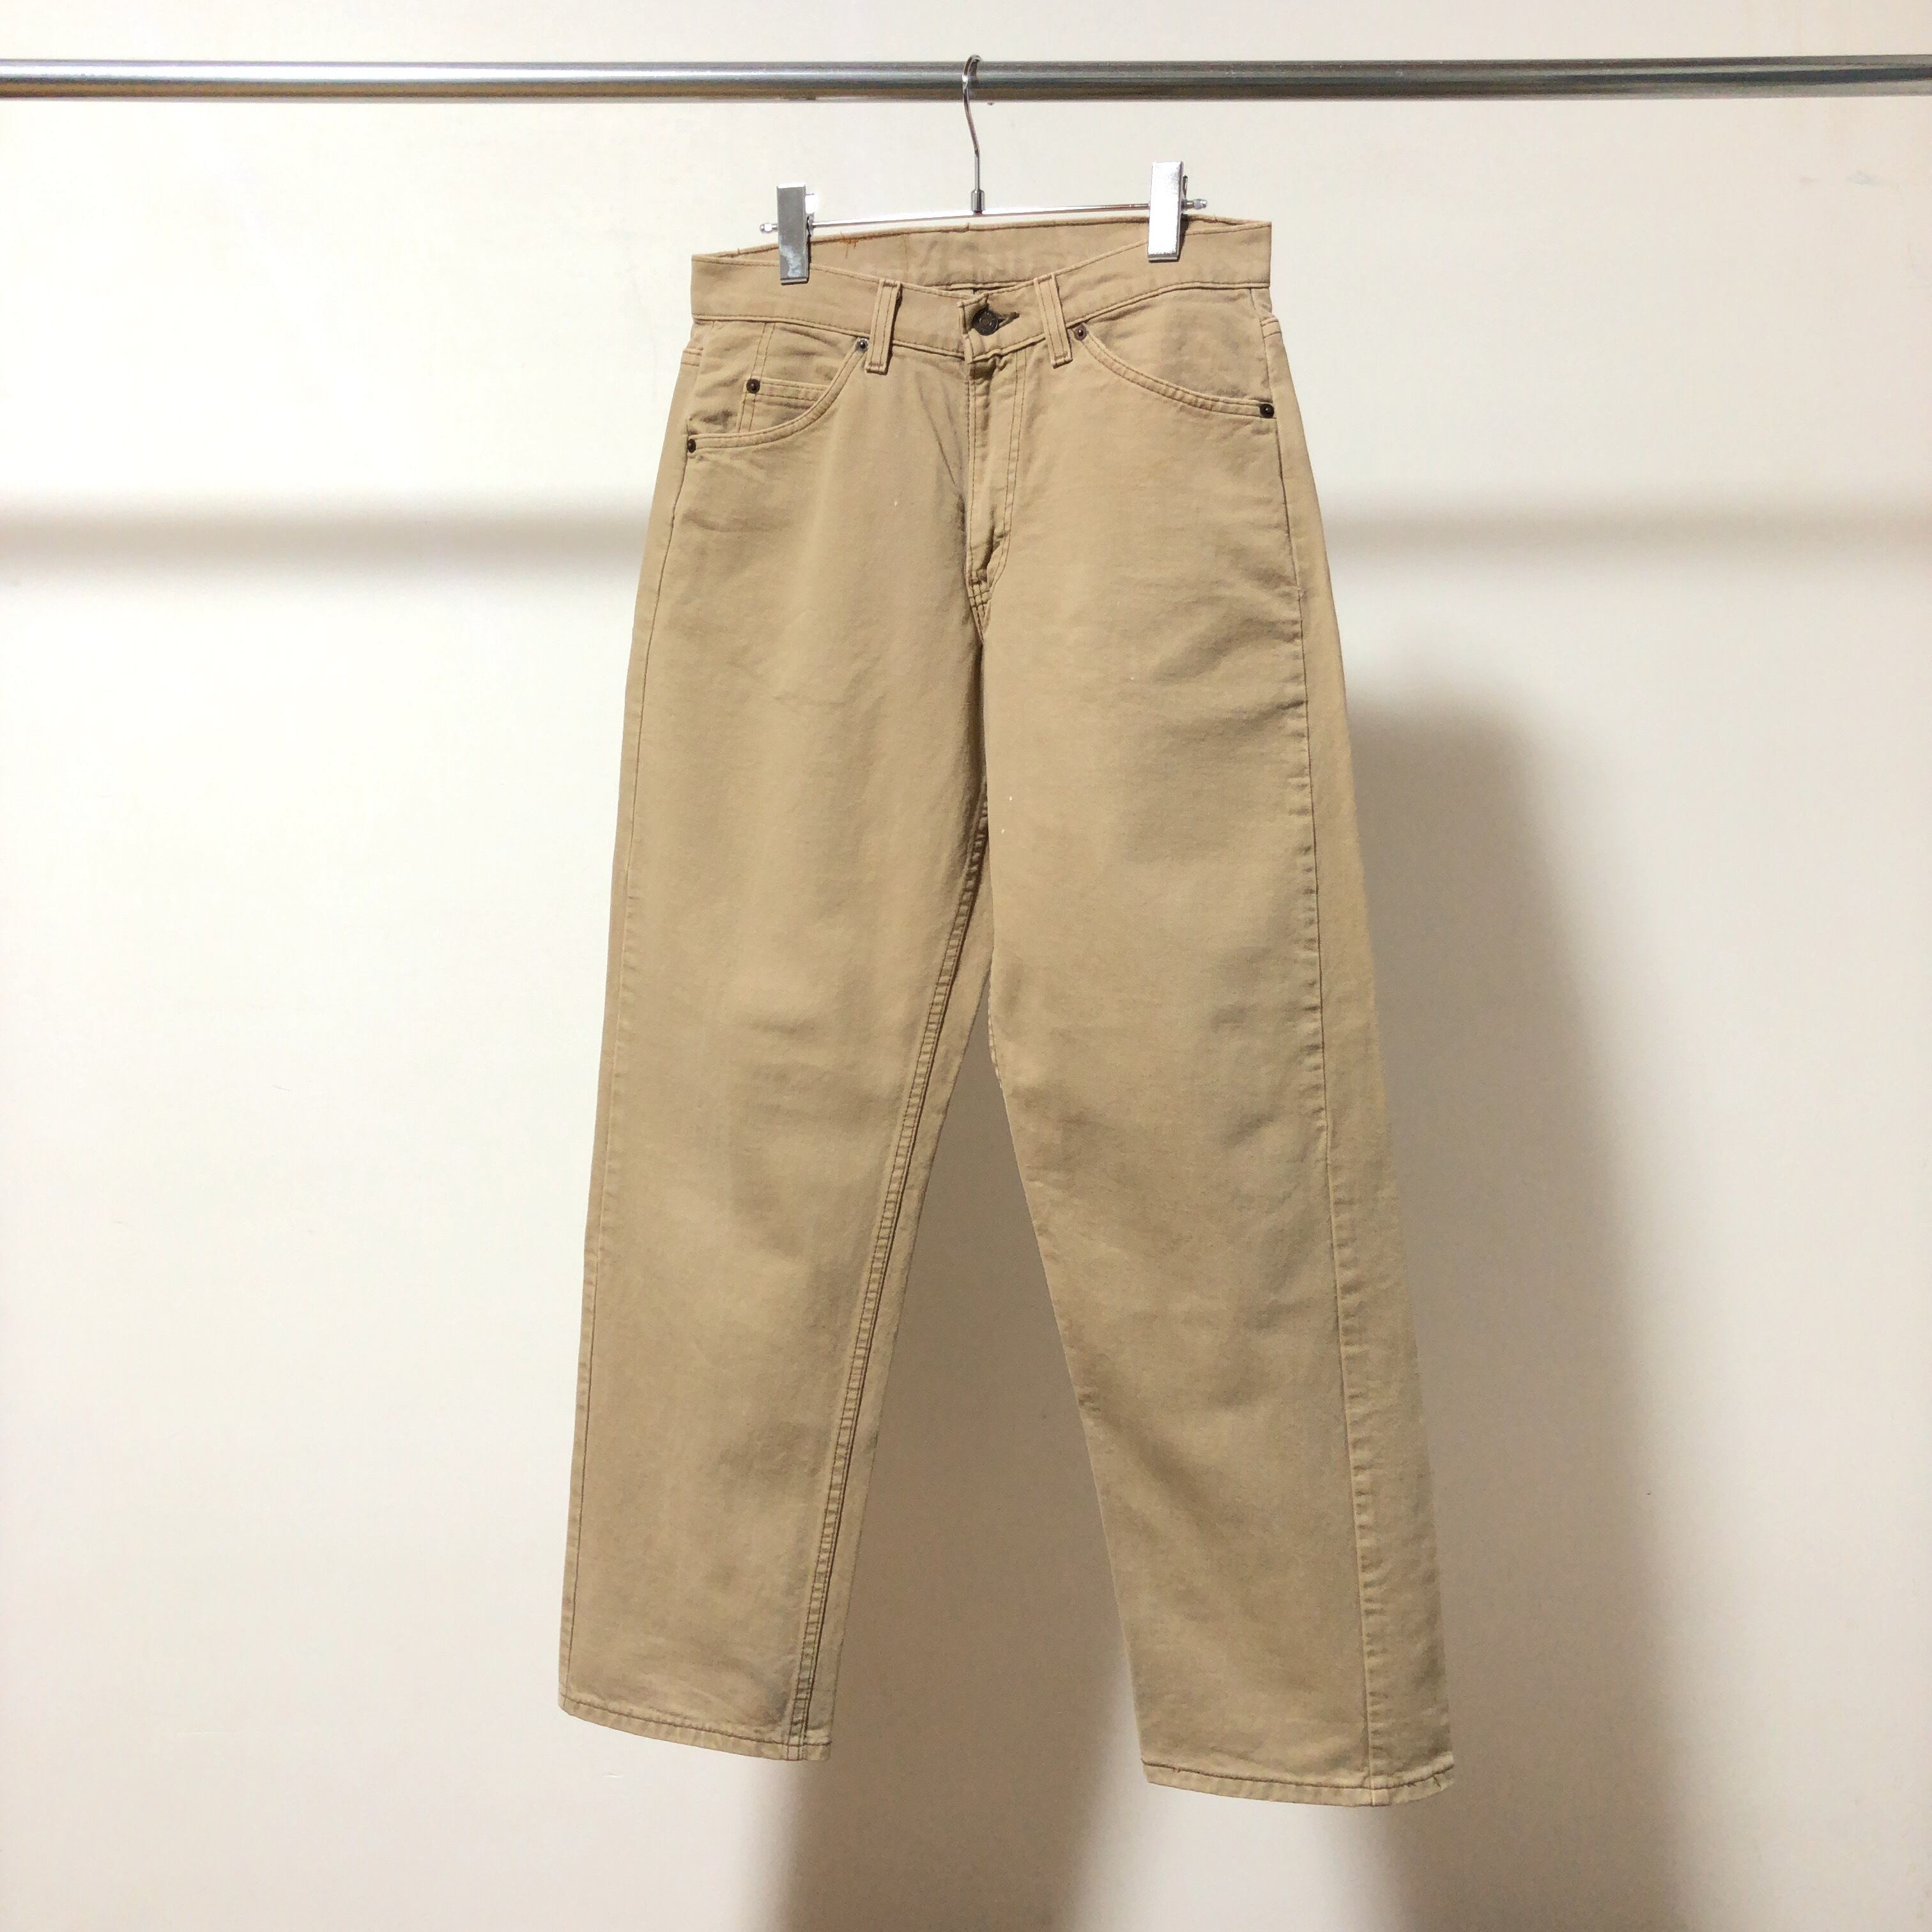 Levi's 565 / 90's Loose Fit Color Denim Pants / Made in USA